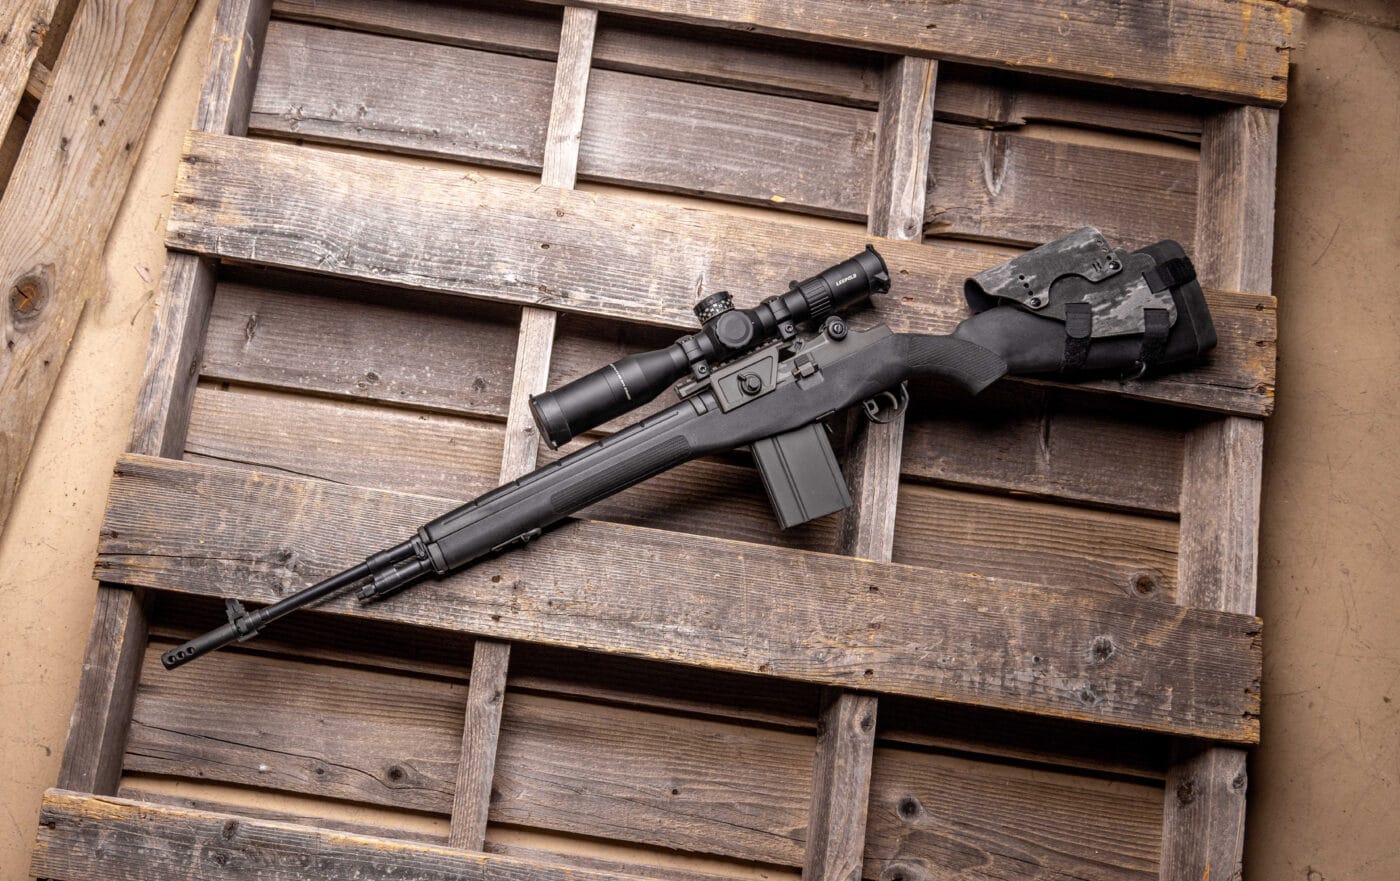 A custom “Crazy Horse” M1A-based rifle built by Smith Enterprise